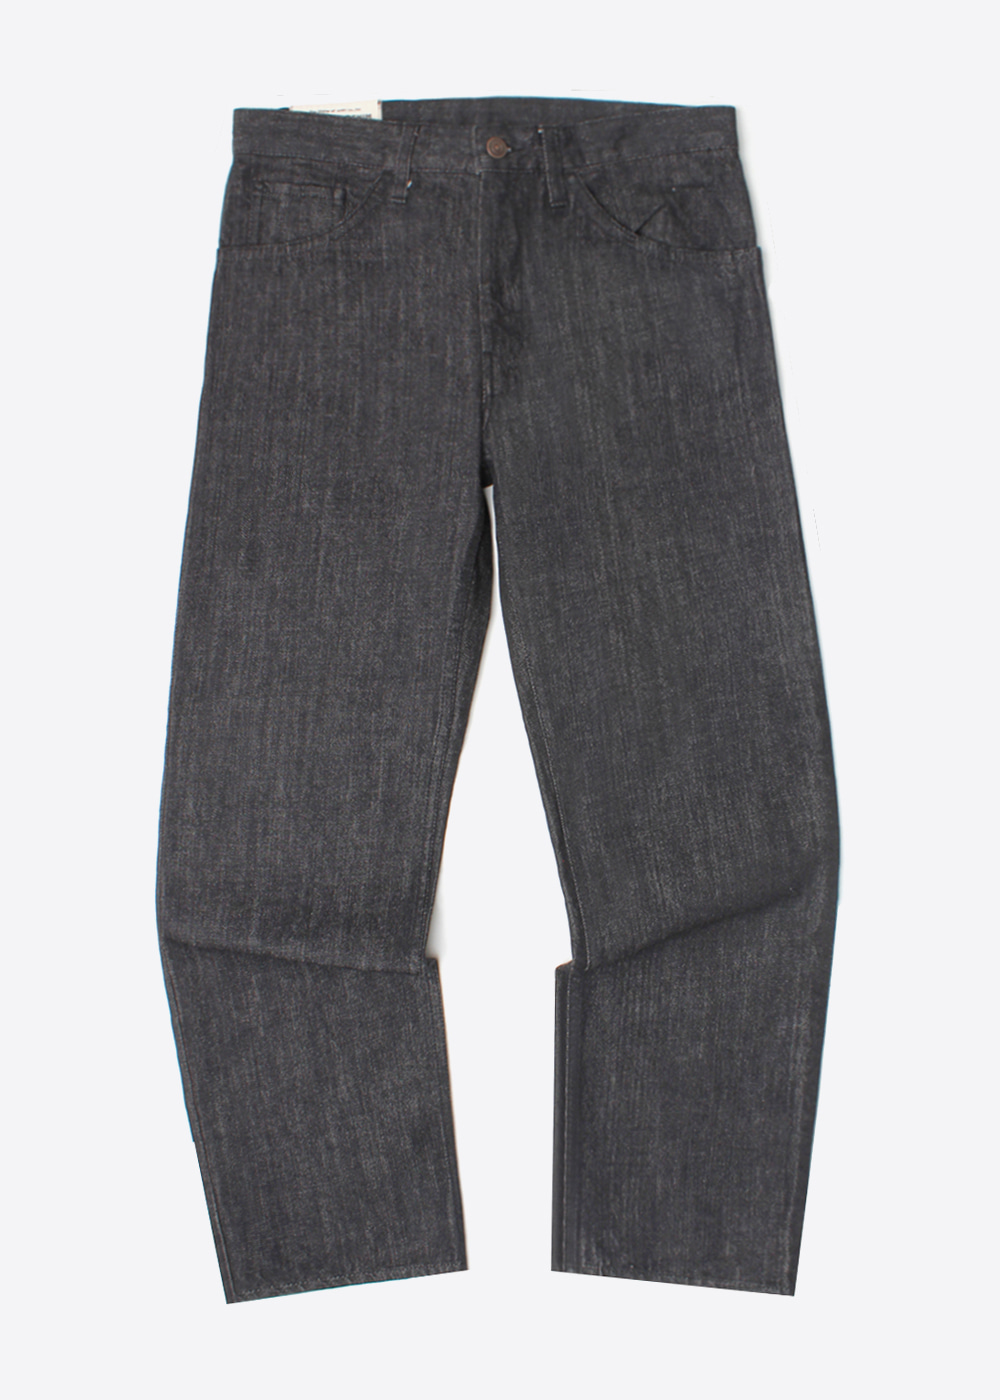 COEN BY UNITED ARROWS’straight fit denim pant